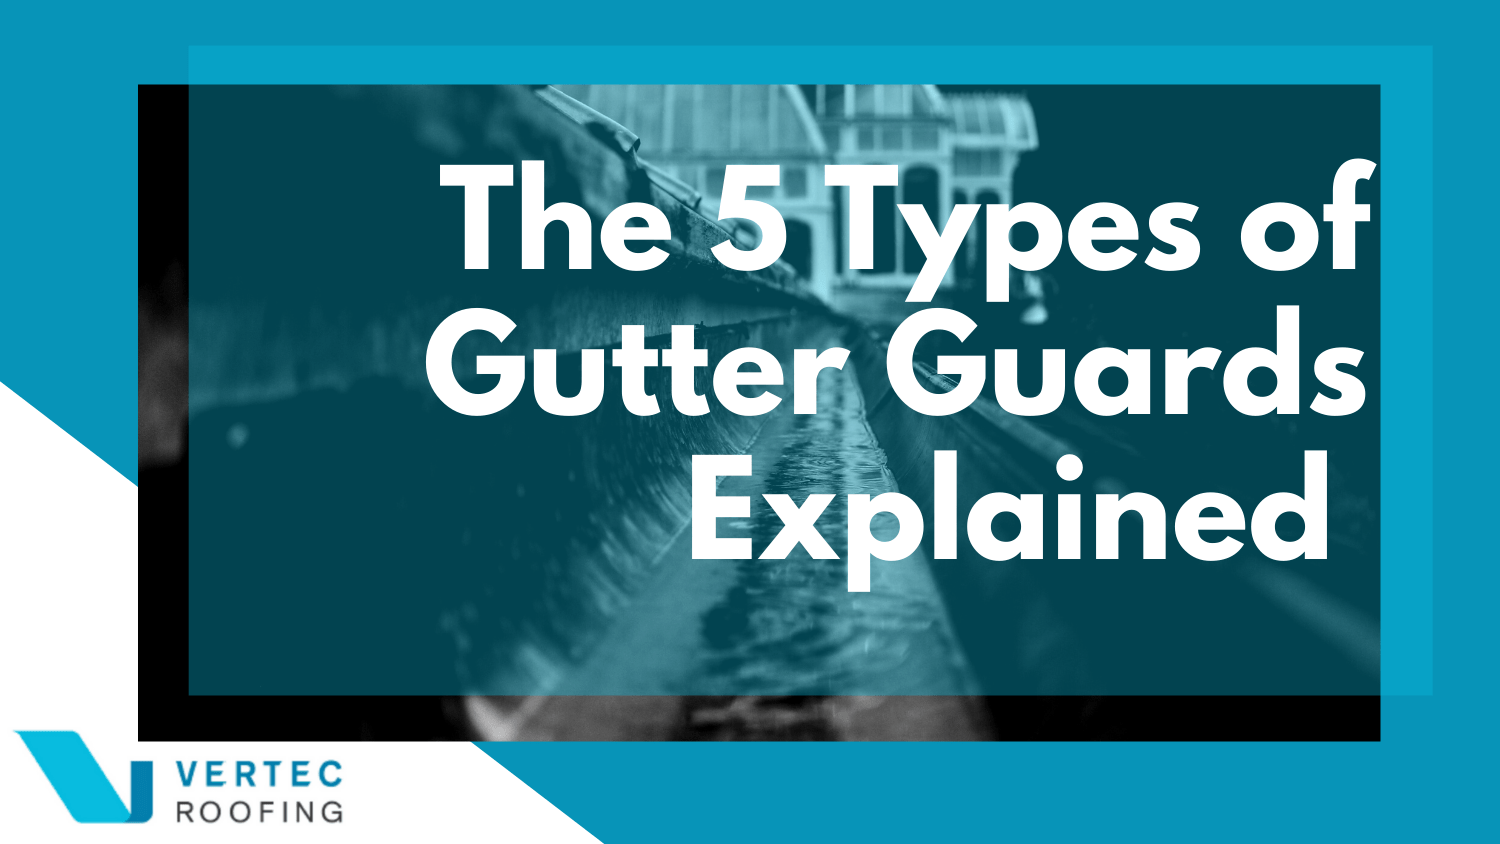 The 5 Types of Gutter Guards Explained